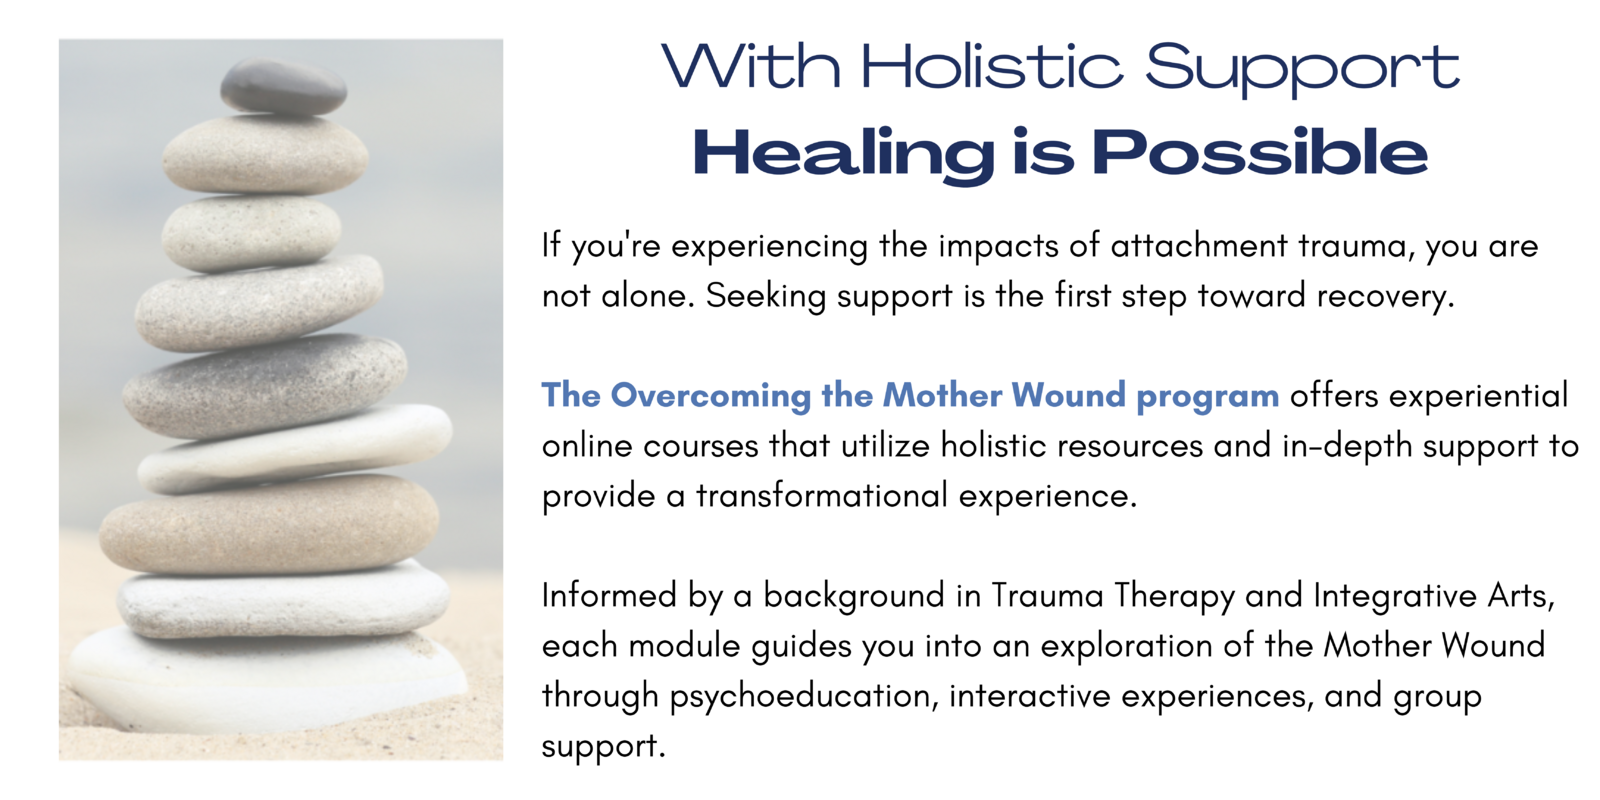 HOLISTIC SUPPORT